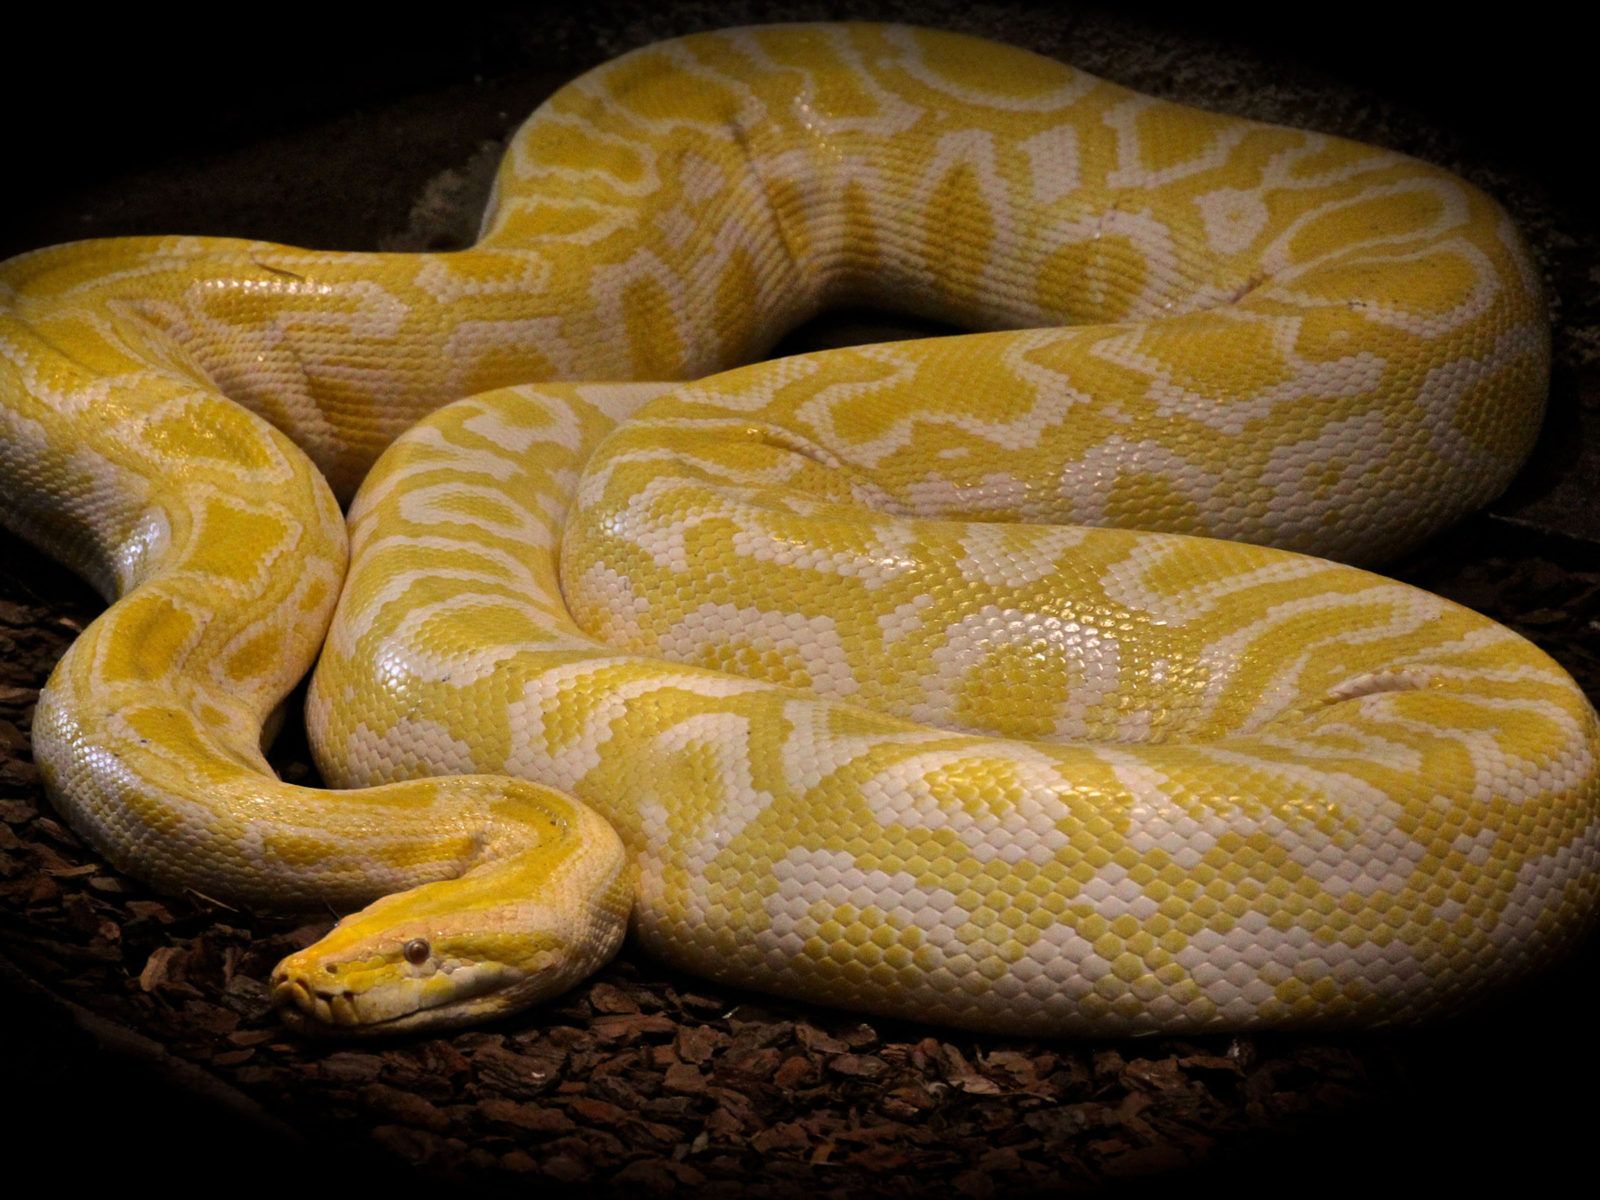 Animals Reptilien Ball Pythons Python Of Bruma Colored Snake With Yellow And White 4k Ultra HD Tv Wallpaper For Desktop Laptop Tablet And Mobile Phones 3840x2400, Wallpaper13.com